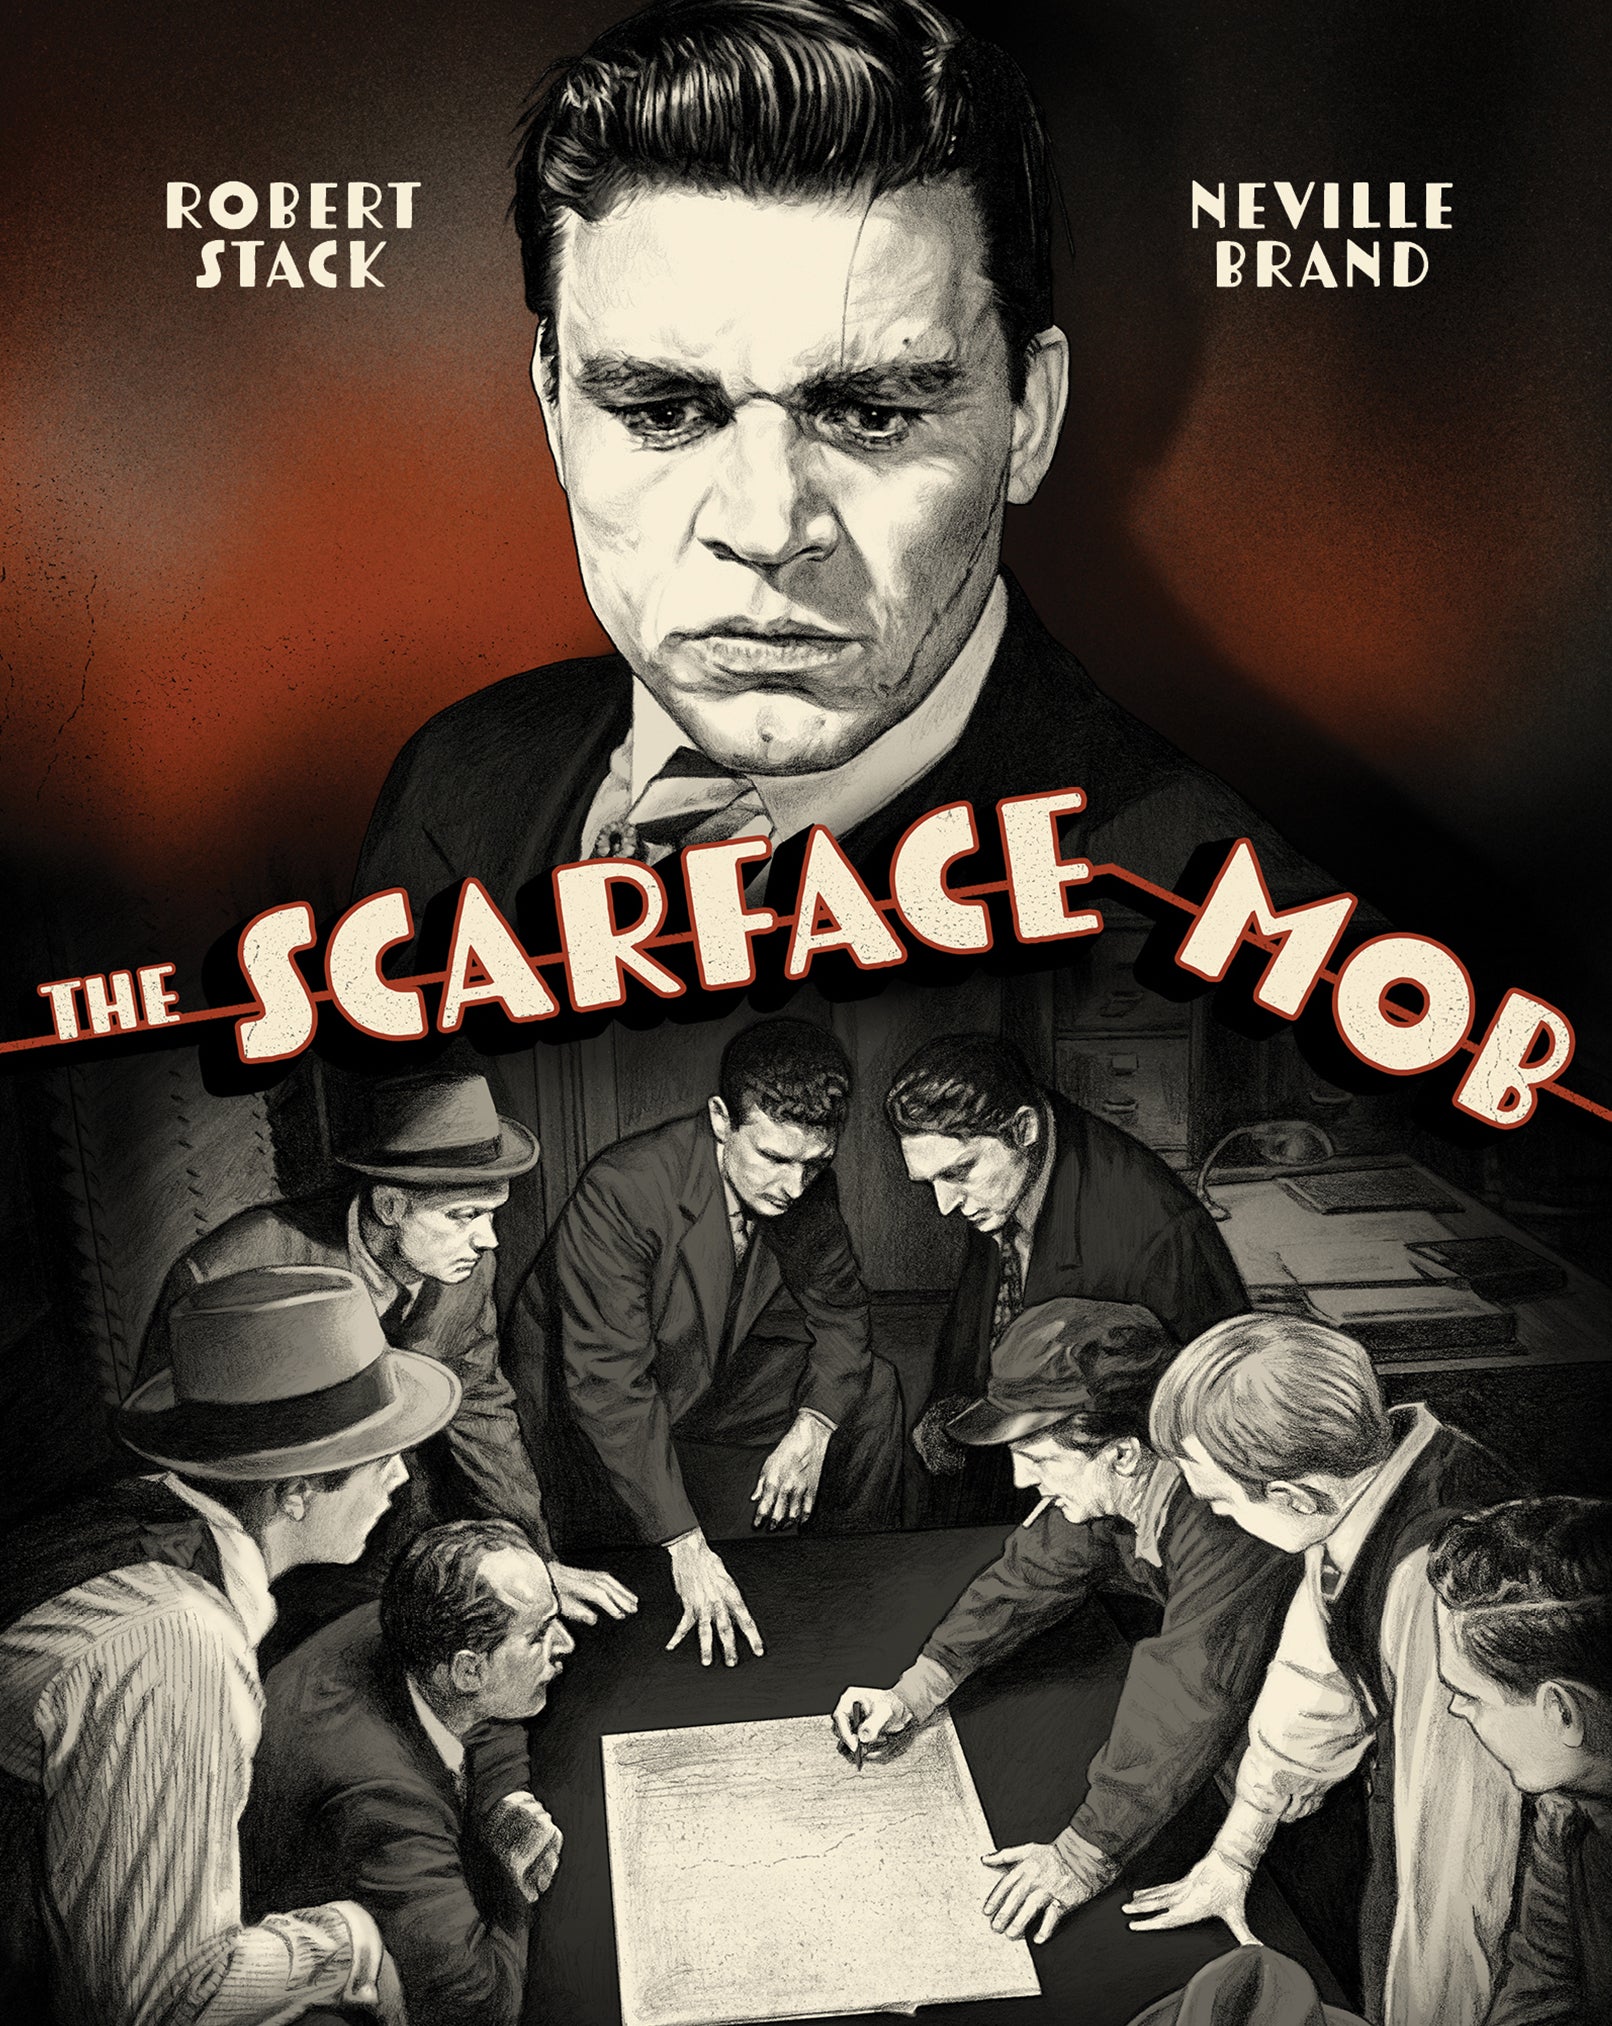 THE SCARFACE MOB (LIMITED EDITION) BLU-RAY